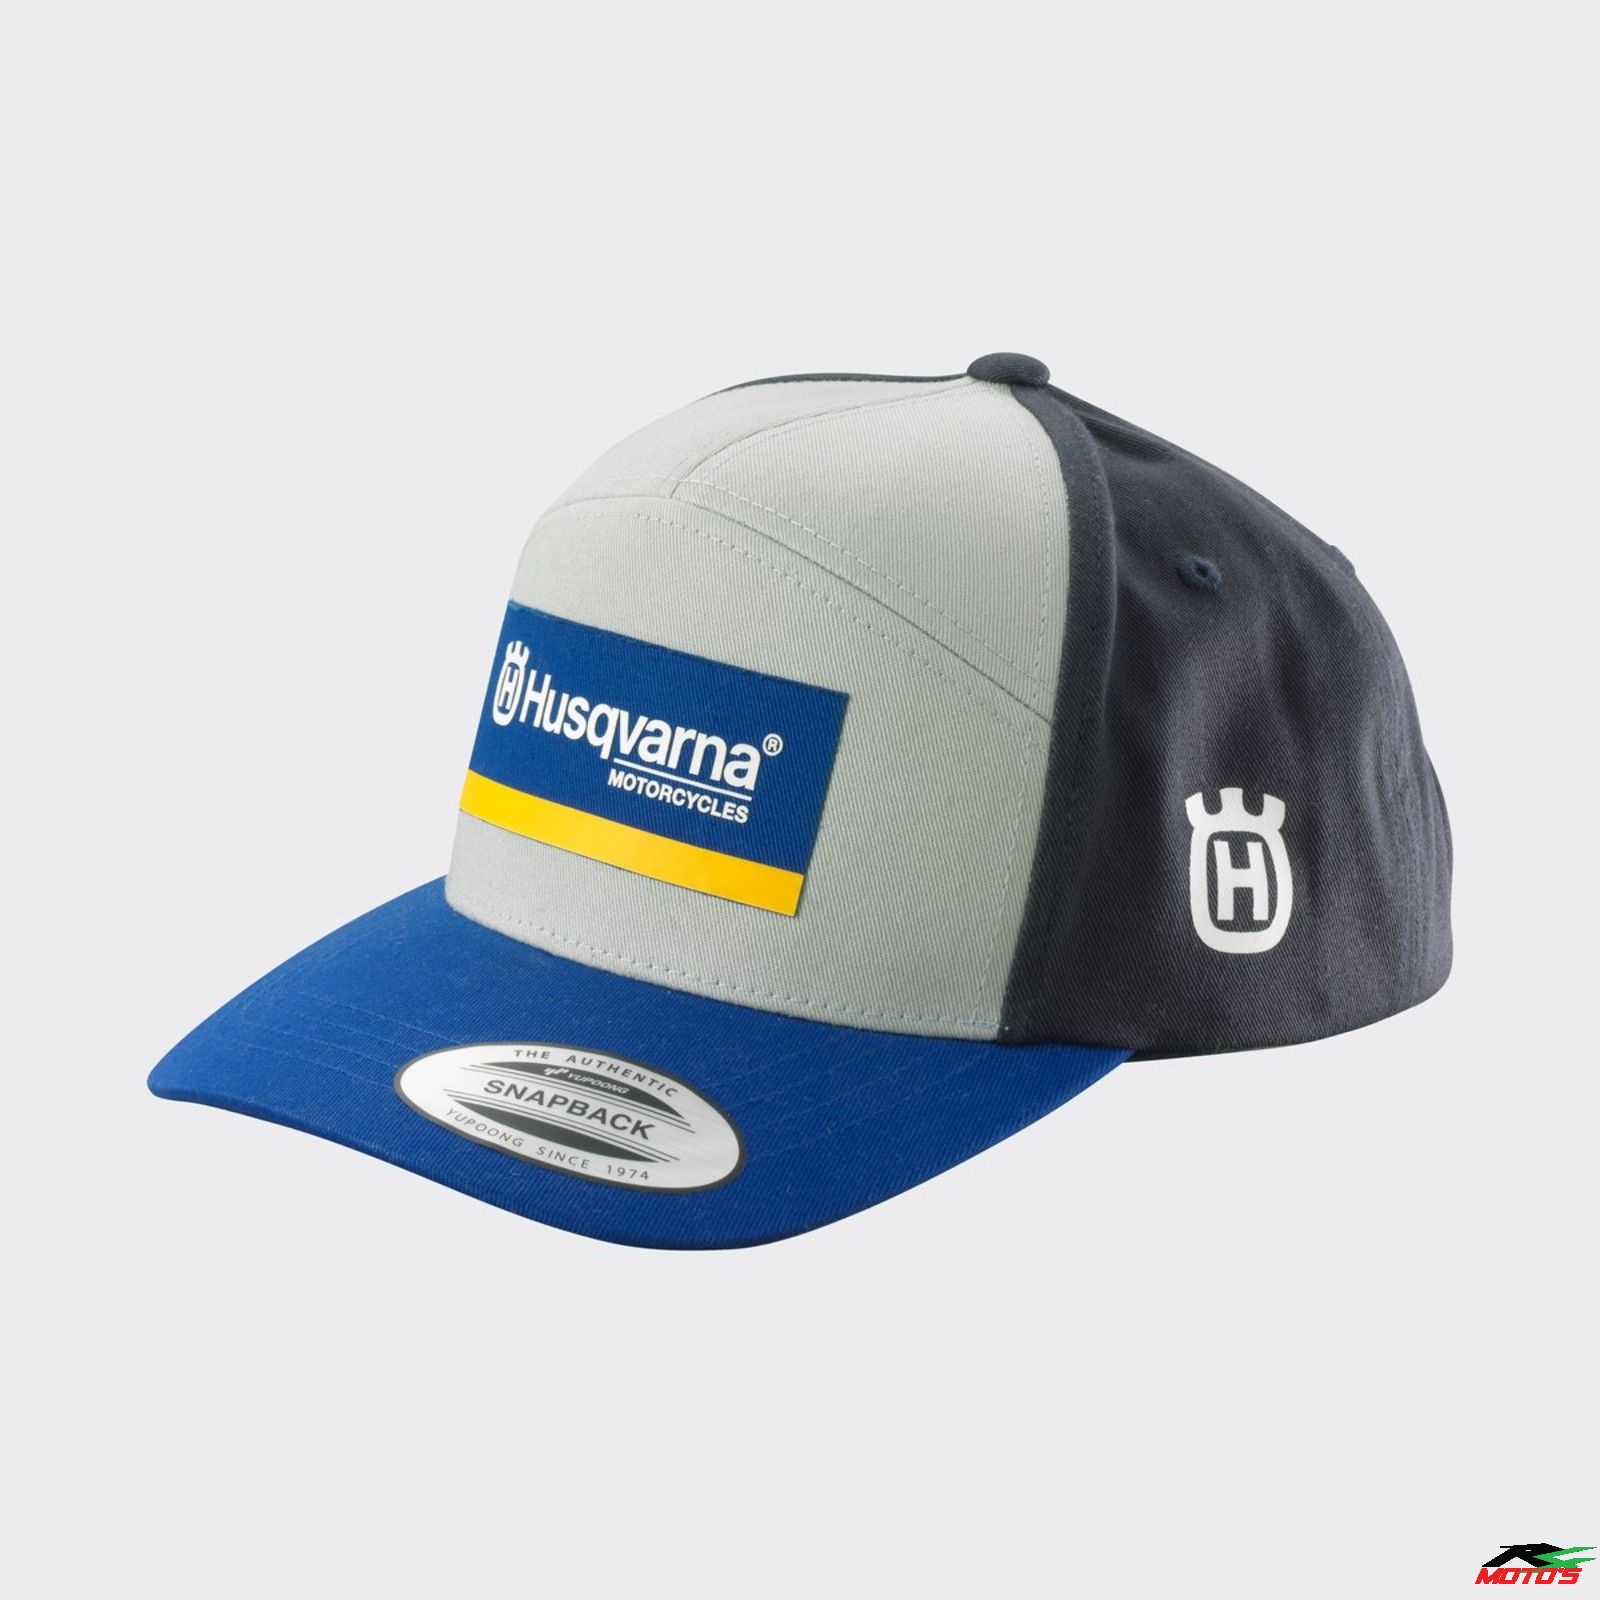 3hs230052400-heritage curved cap